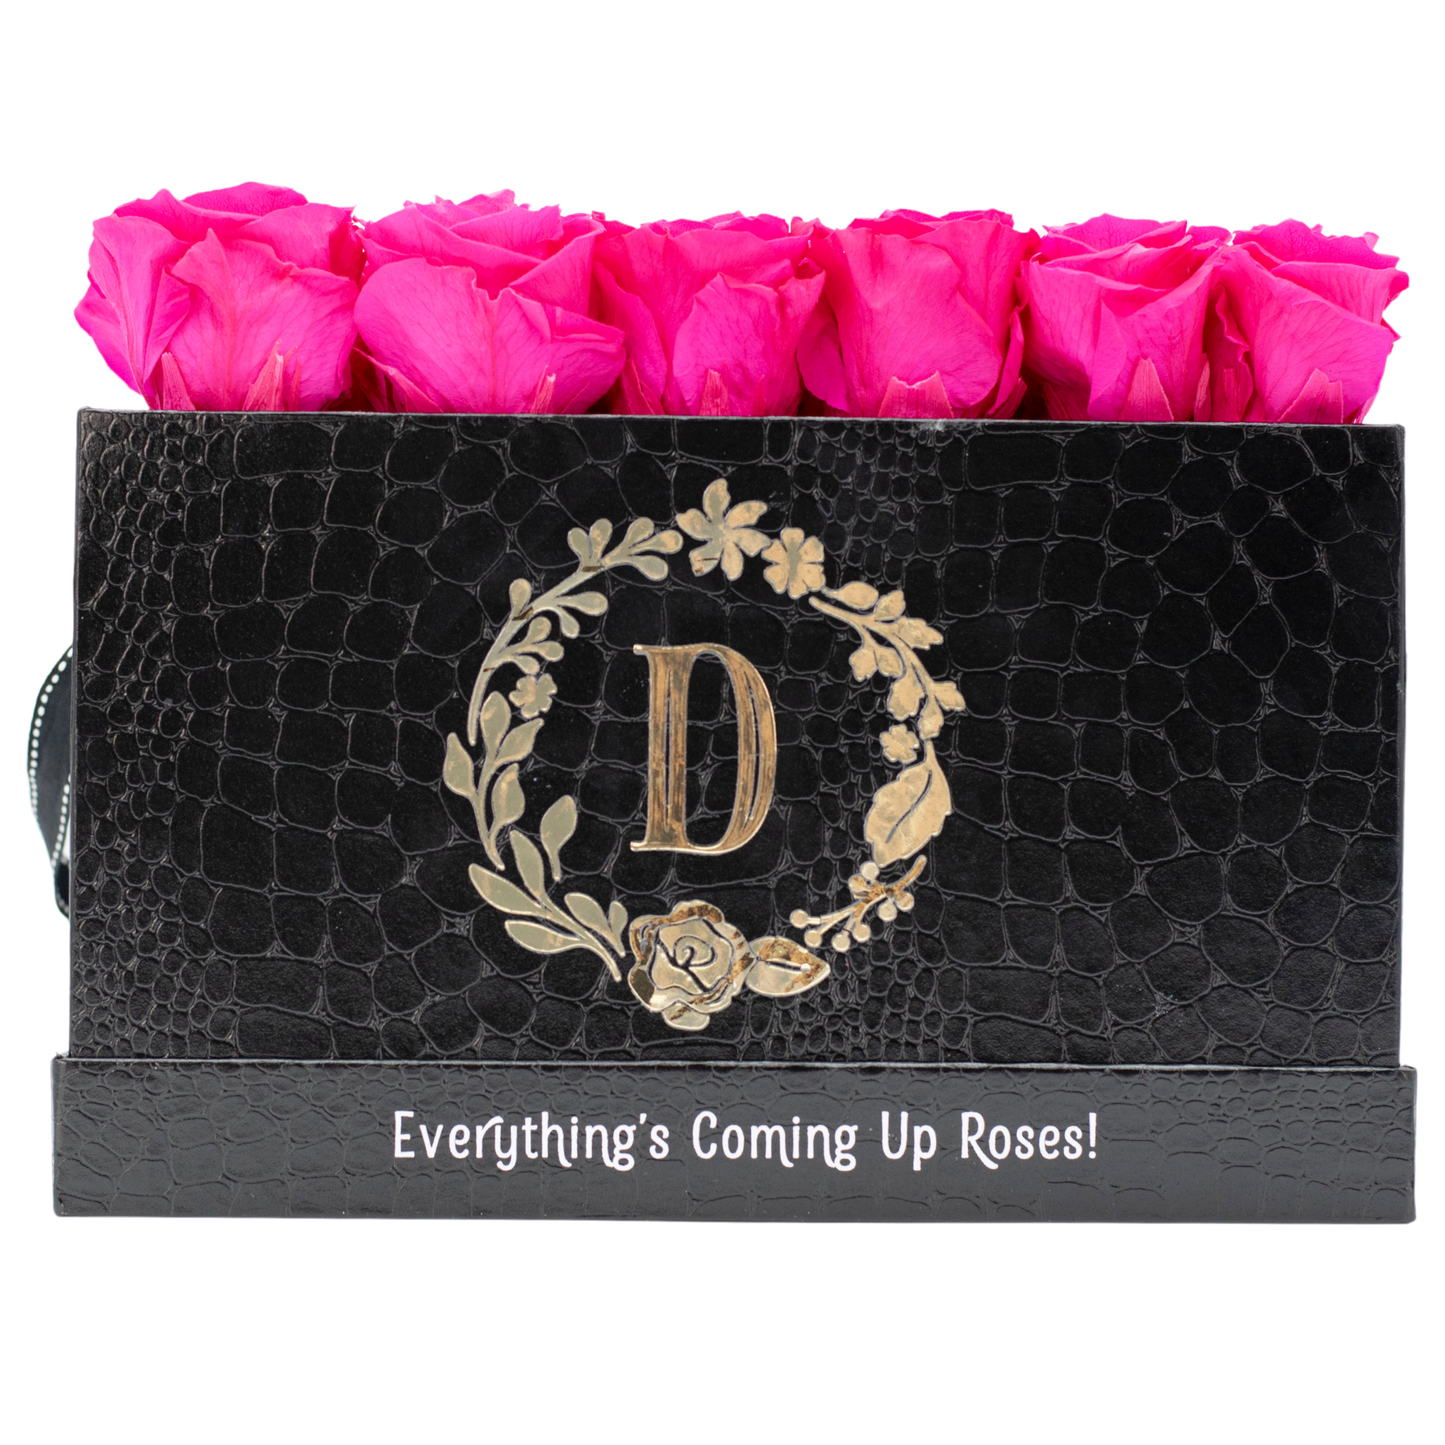 The Black Monogrammed Pop of the Line - Raspberry Punch Roses